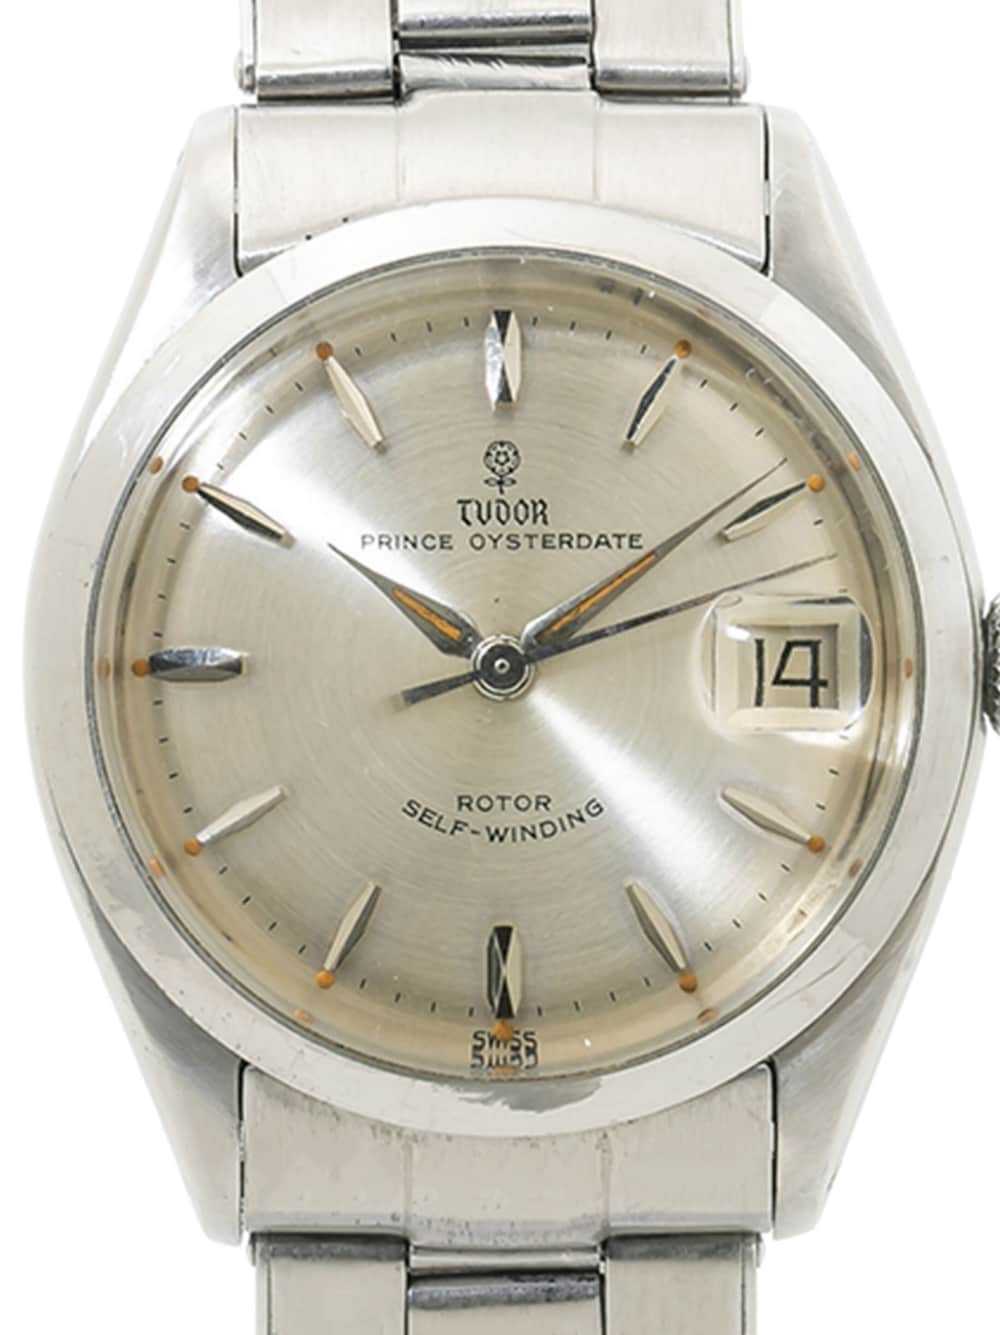 TUDOR pre-owned Prince OysterDate 34mm - Silver - image 2